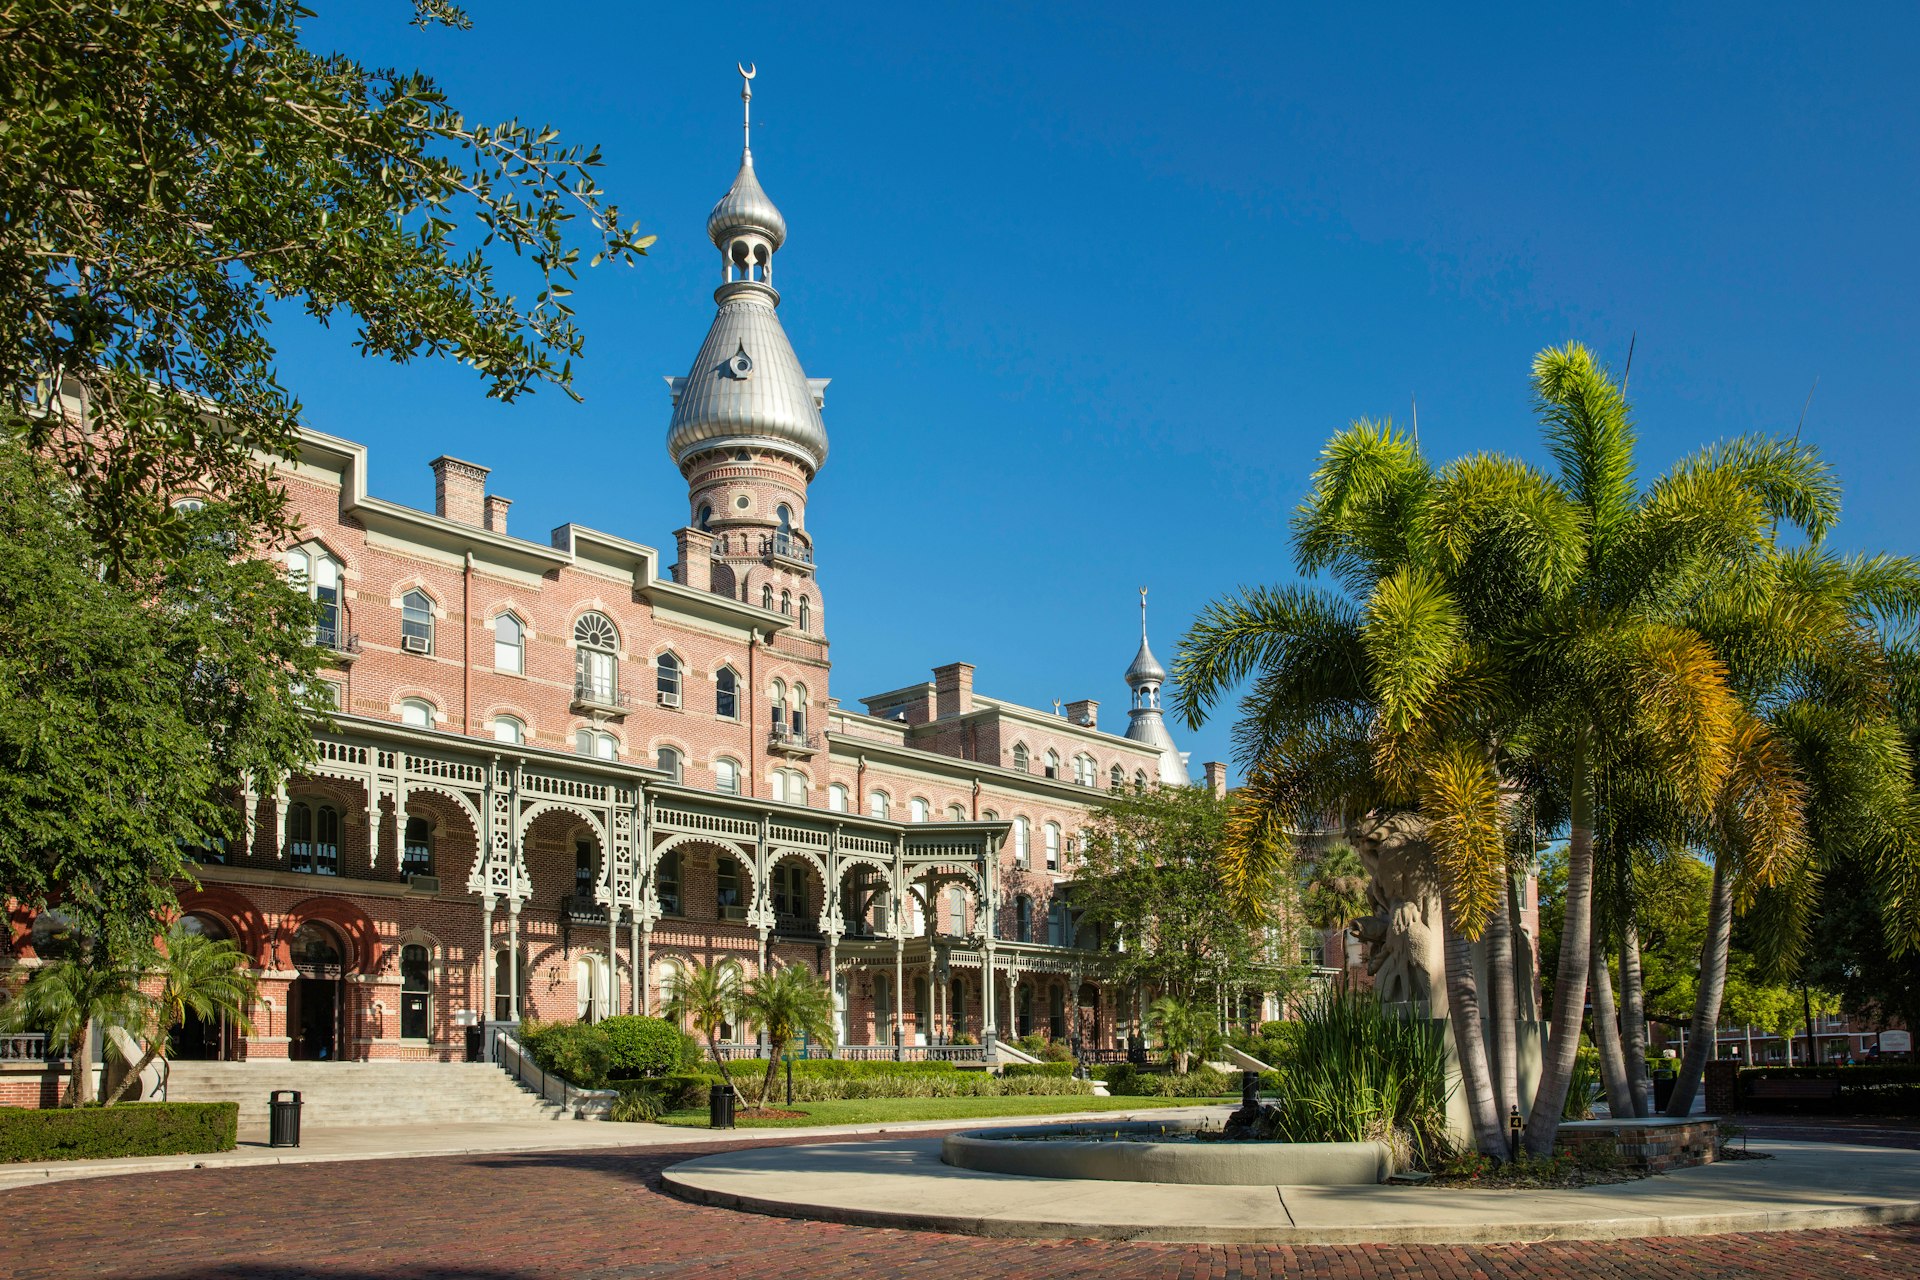 Henry B. Plant Museum - originally, the Tampa Bay Hotel (b. 1891) on the campus of University of Tampa, Tampa, Florida, USA